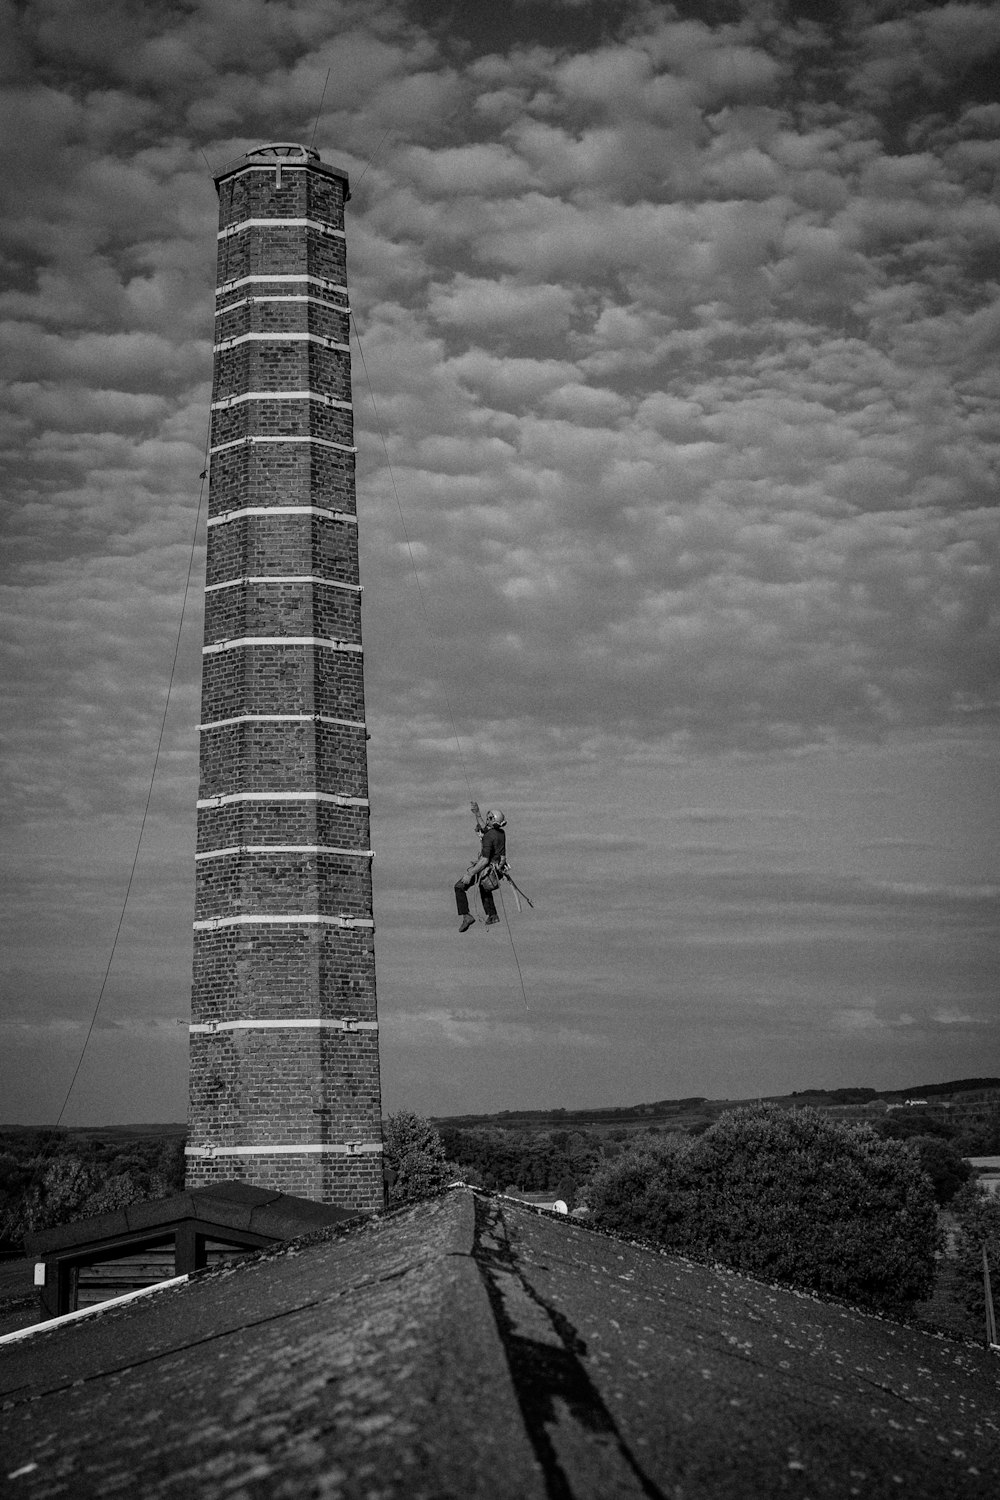 a person jumping off a tall tower